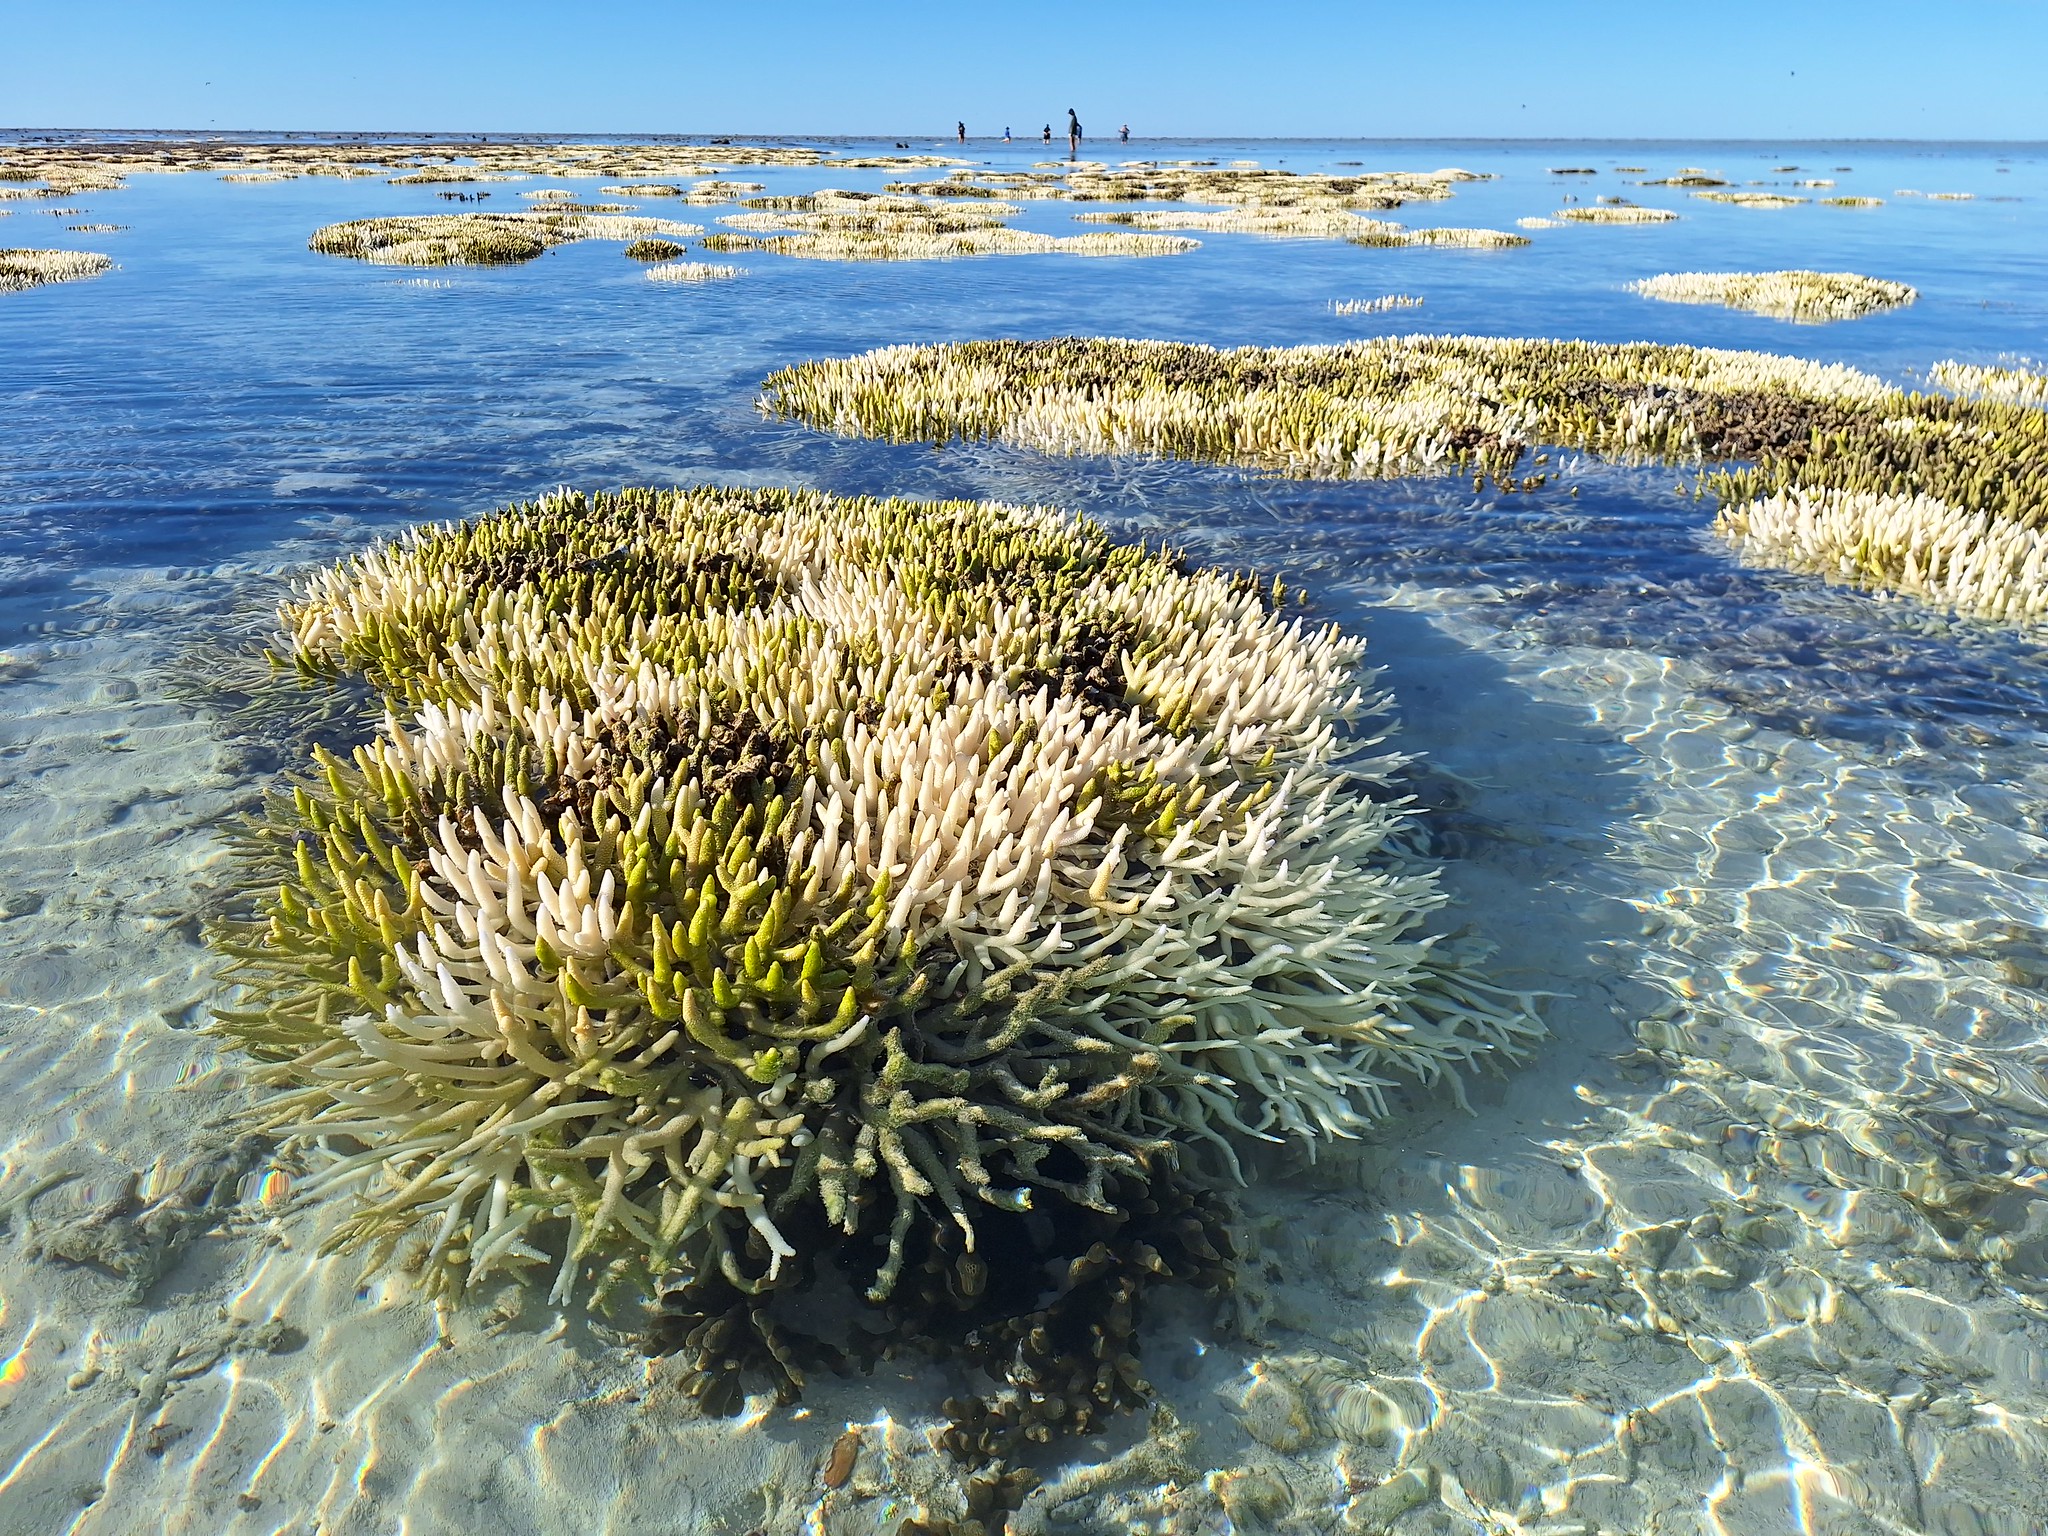 Bleached corals at low tide, Heron Island, Australia, April 10, 2024 (by John Turnbull CC BY-NC-SA 2.0 DEED via Flickr).